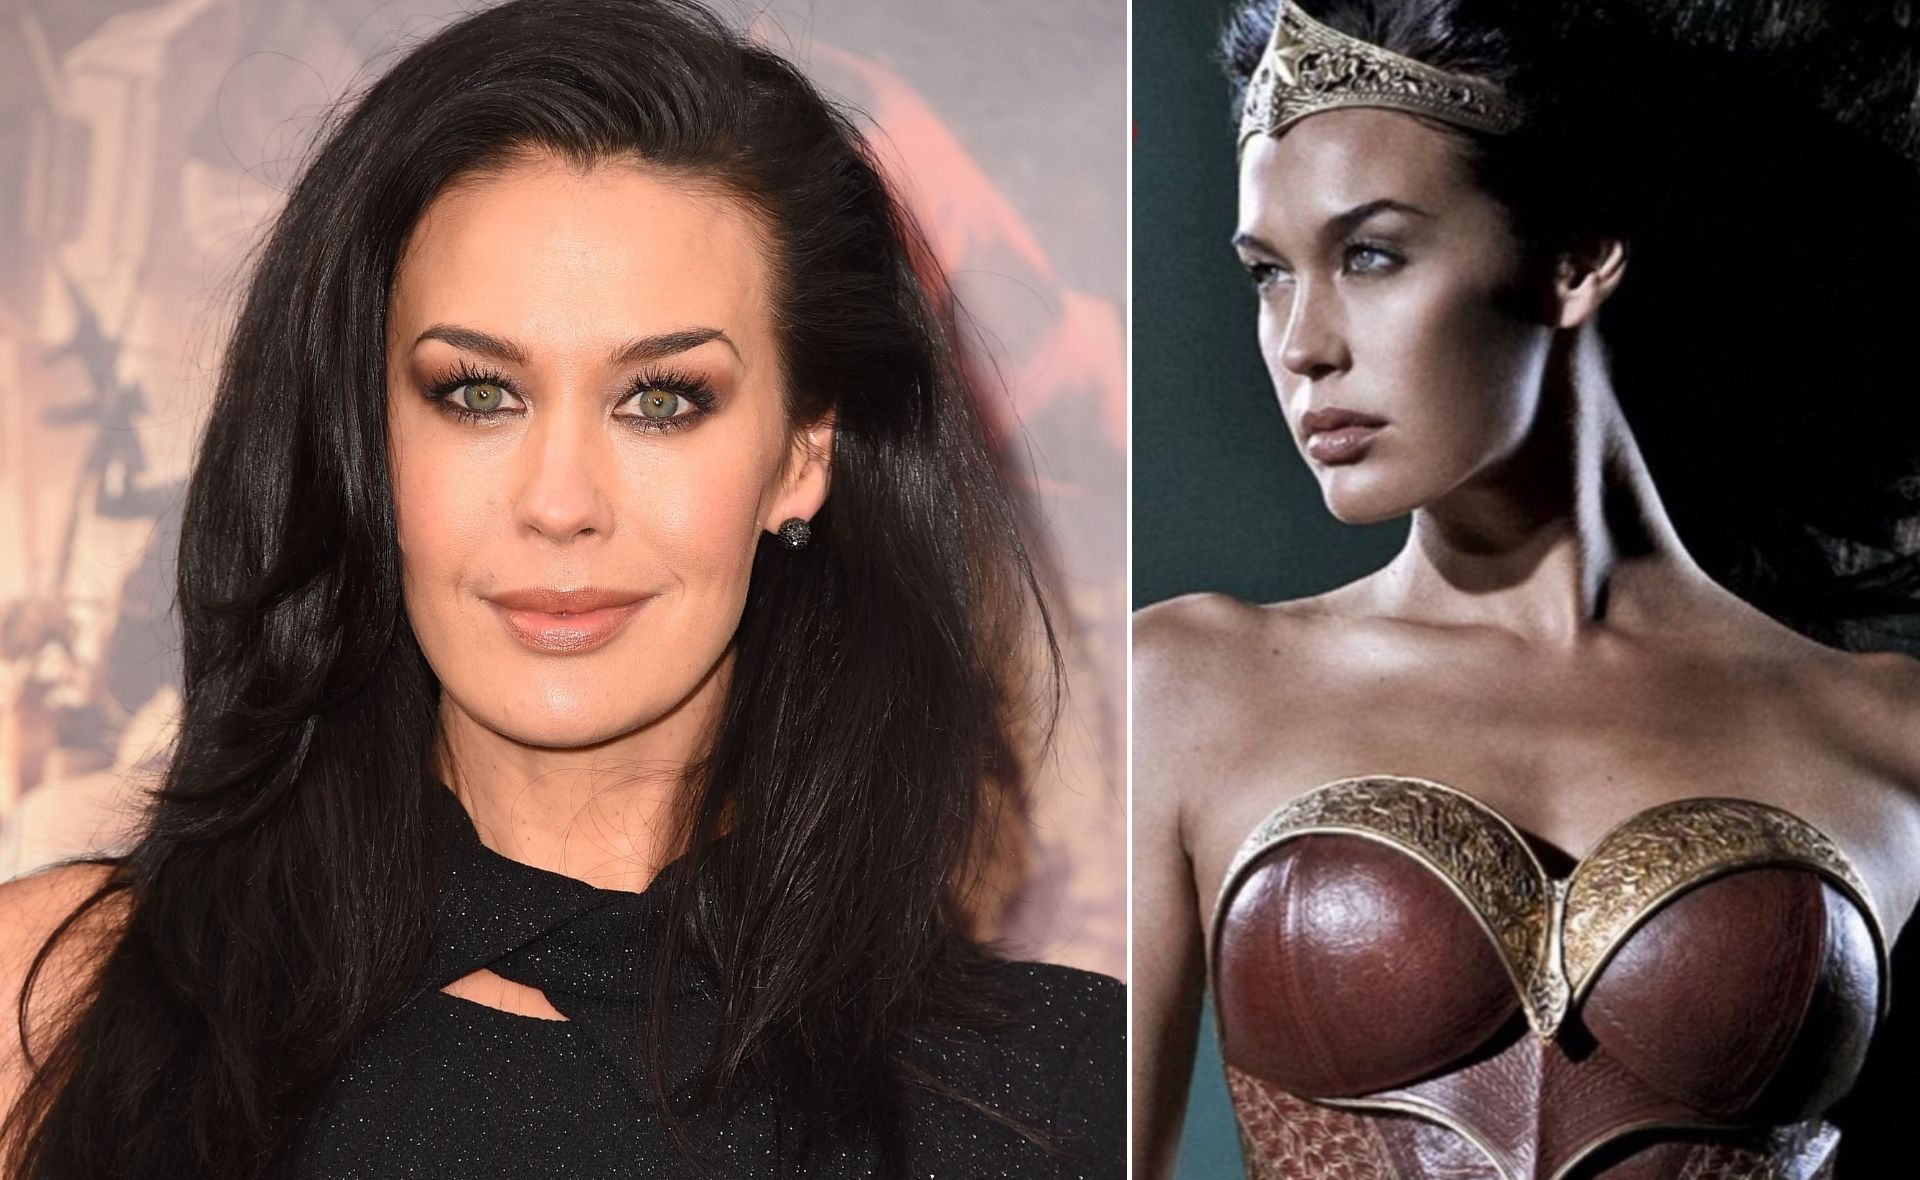 She’s one of Australia’s most famous models, but Megan Gale almost nabbed this iconic superhero acting role